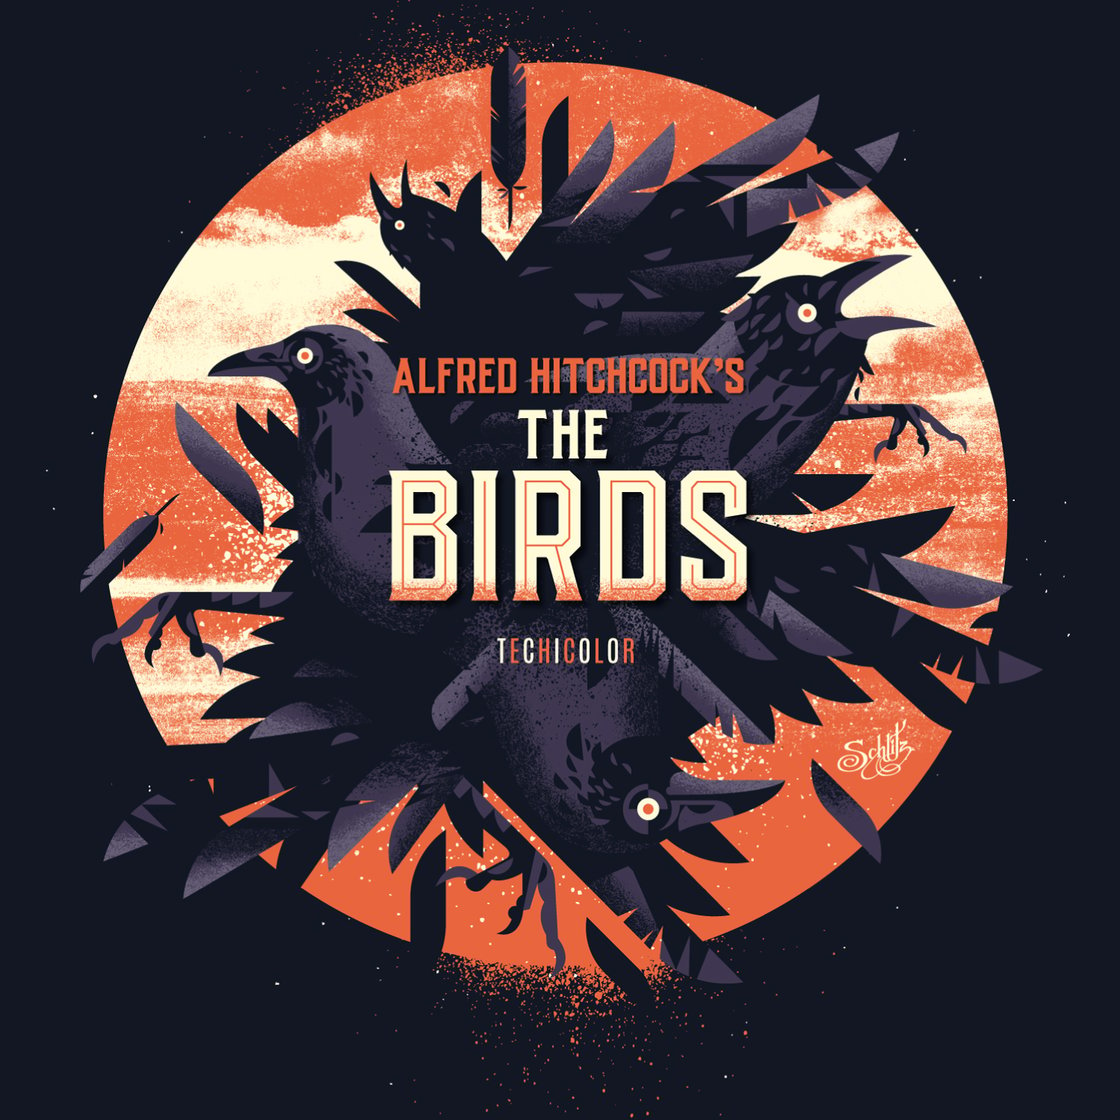 Image of Alfred Hitchcock's The Birds